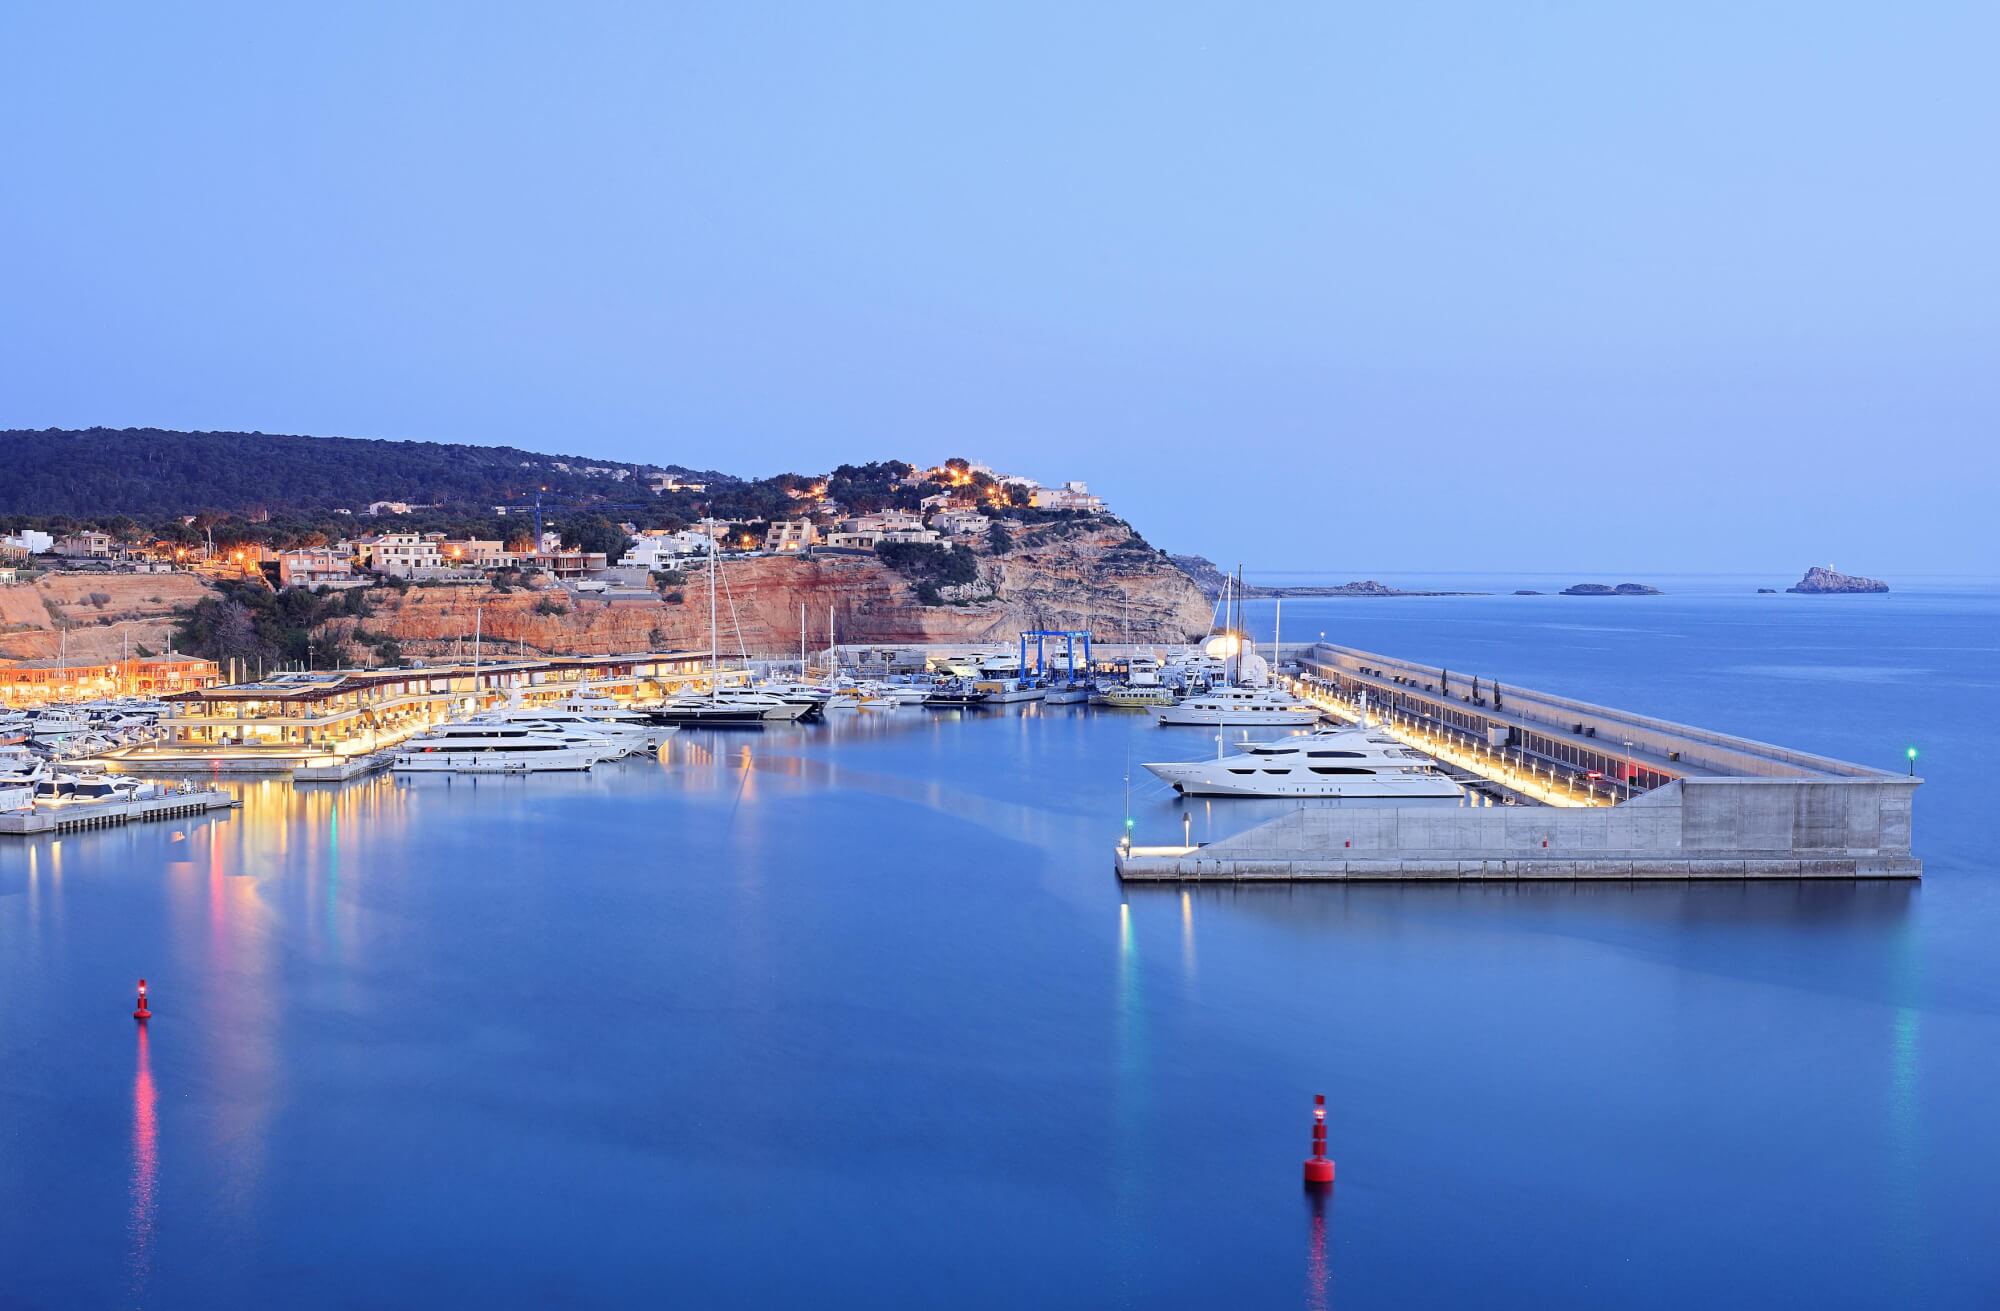 Port Adriano, the new harbor designed by Philippe Starck